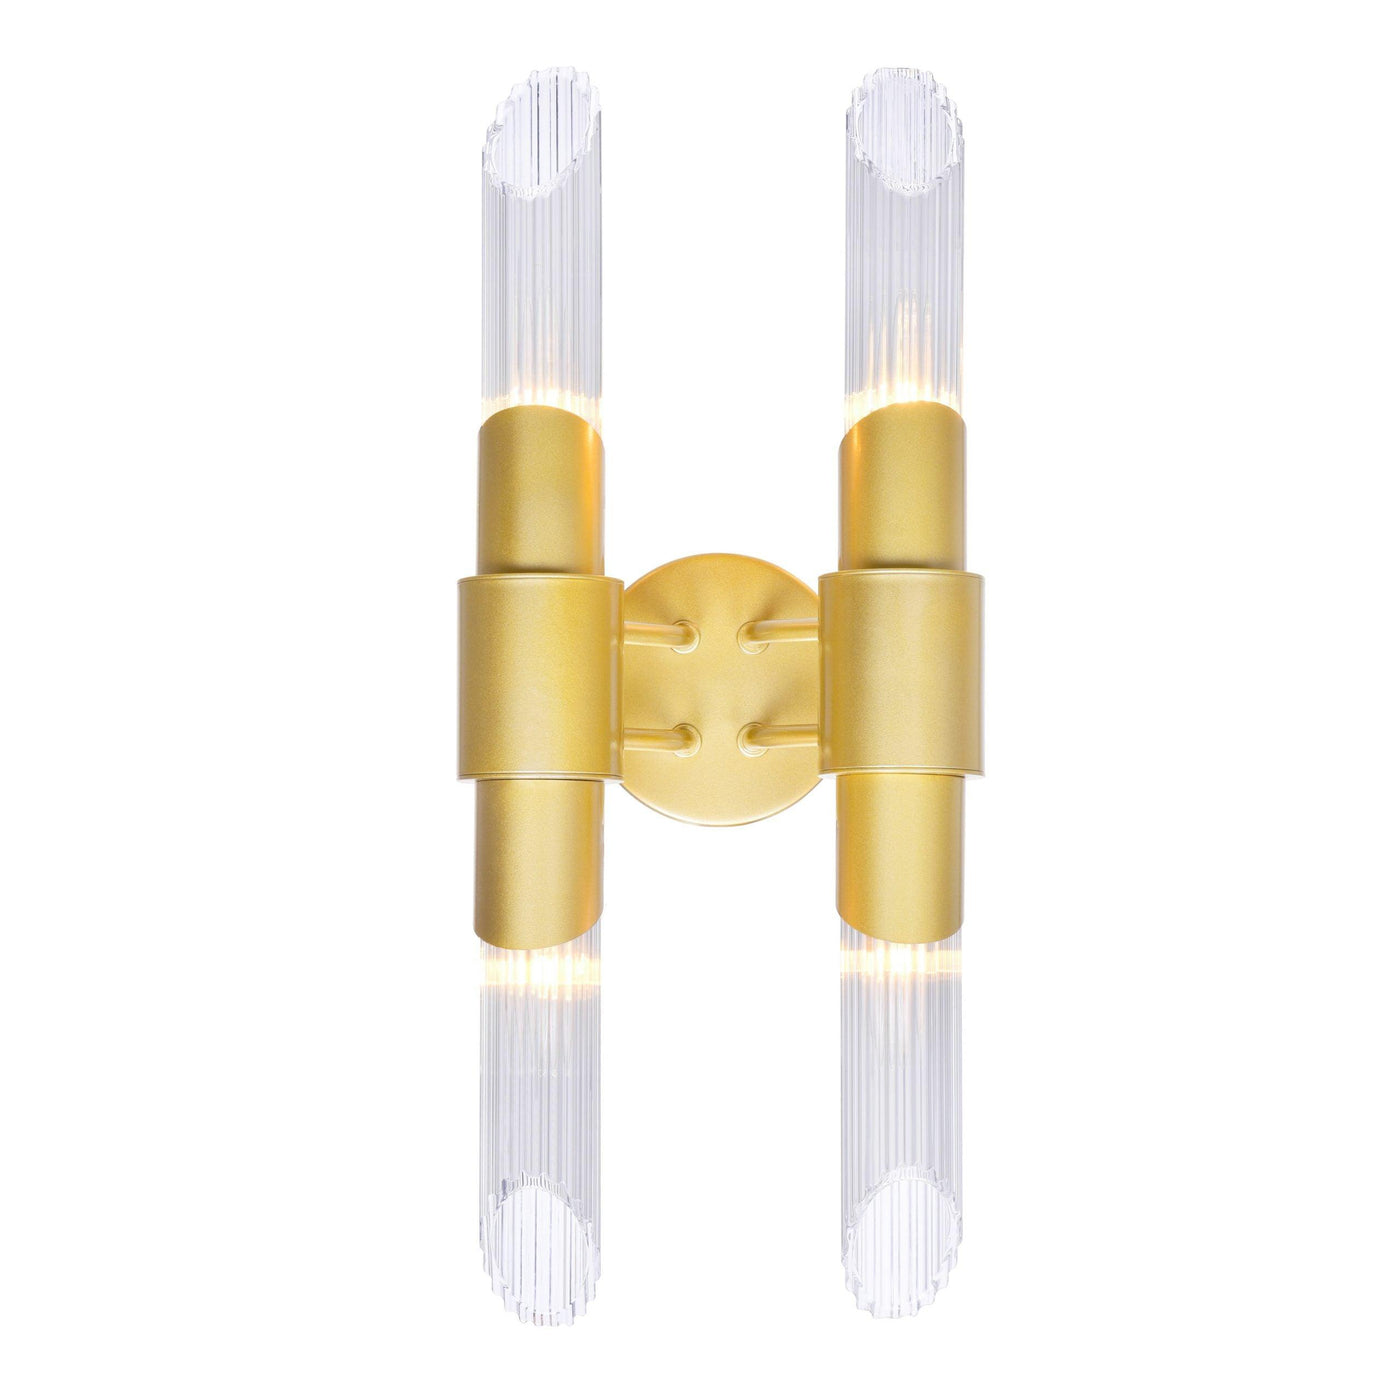 Satin Gold with Glass Tube Shade Wall Sconce - LV LIGHTING